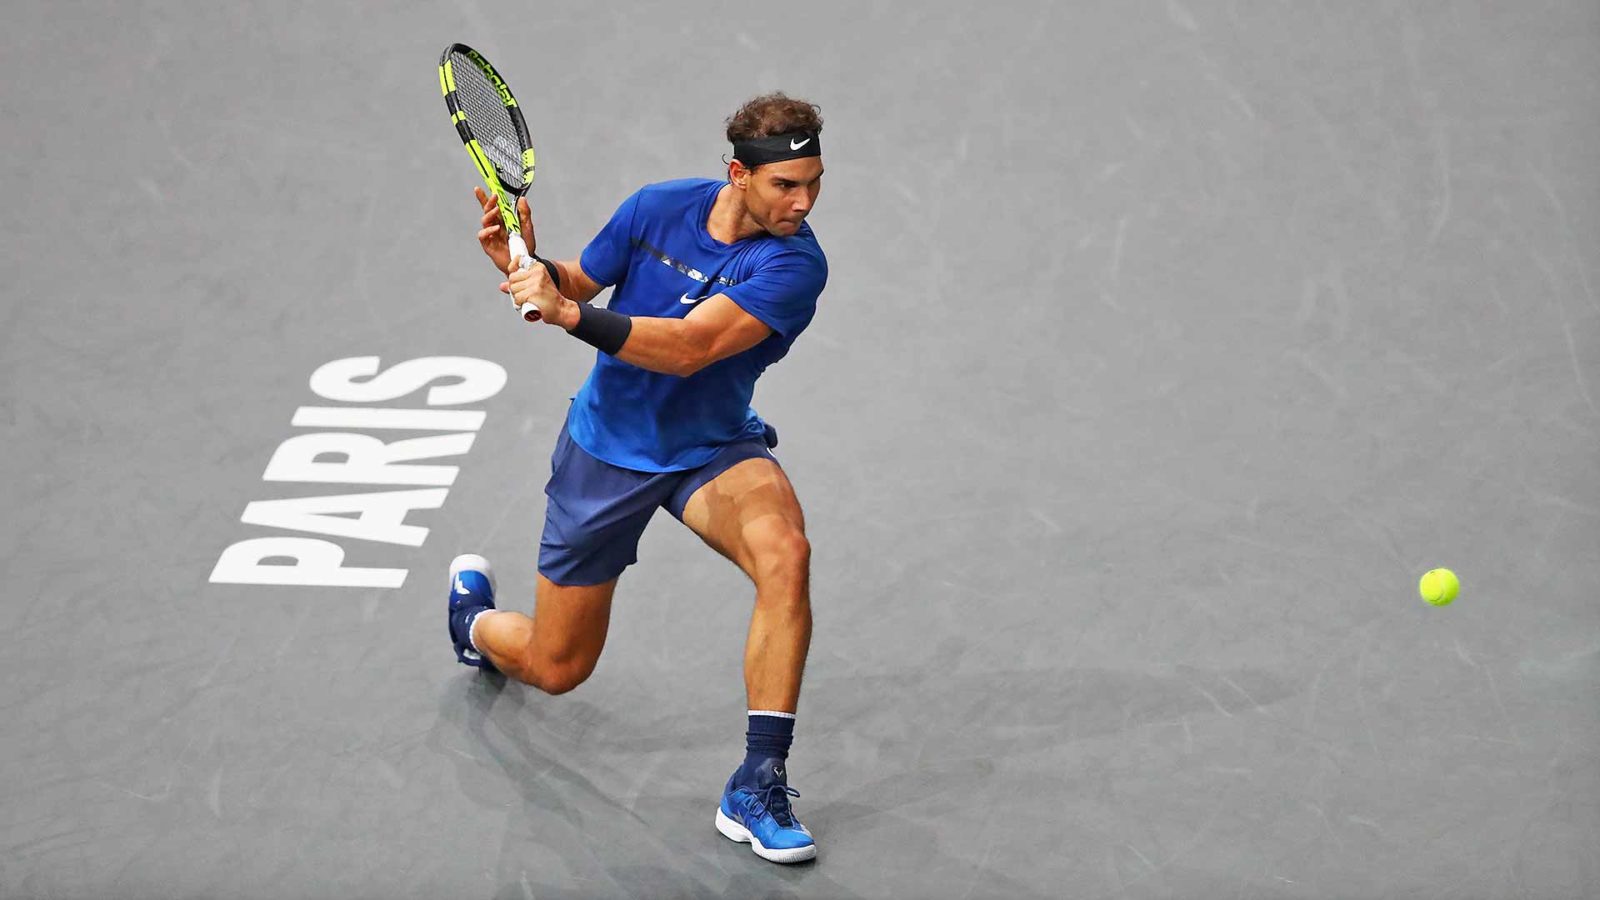 Rafael Nadal drops out of top-10 after 18 years - On Court